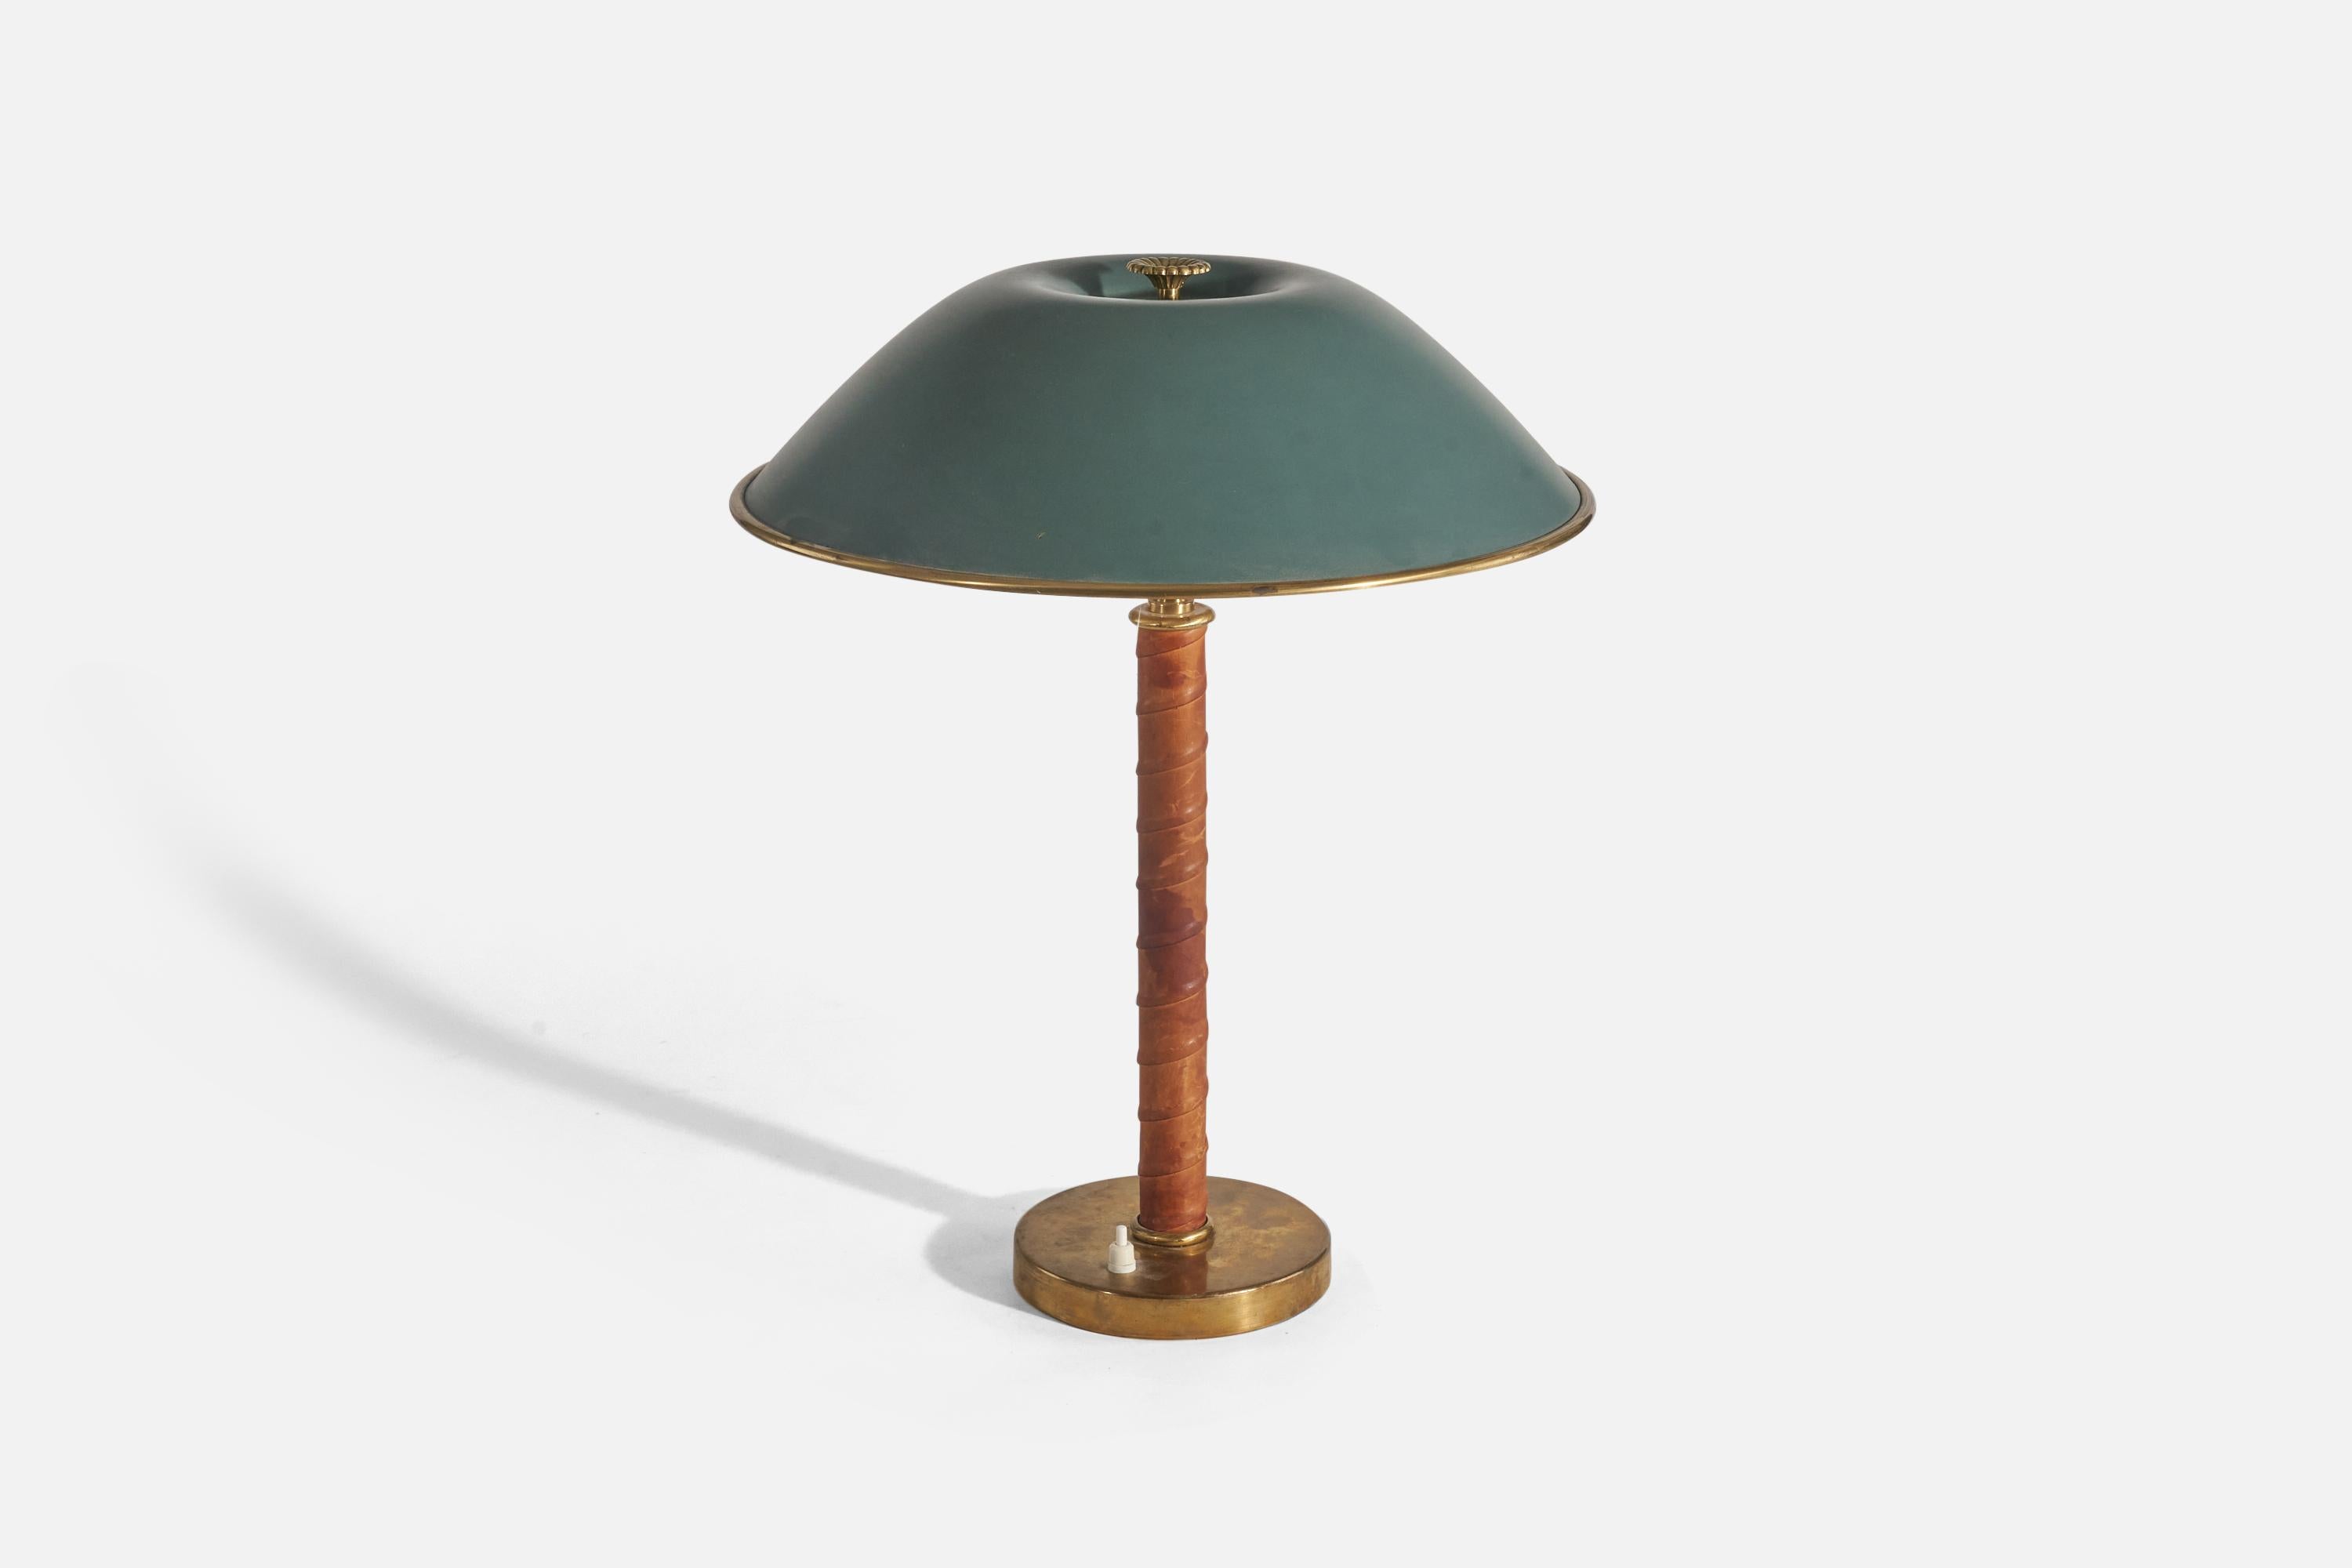 A brass, leather and green-lacquered metal table lamp designed and produced by Böhlmarks, Sweden, c. 1940s. 

Socket takes standard E-26 medium base bulb.
There is no maximum wattage stated on the fixture.